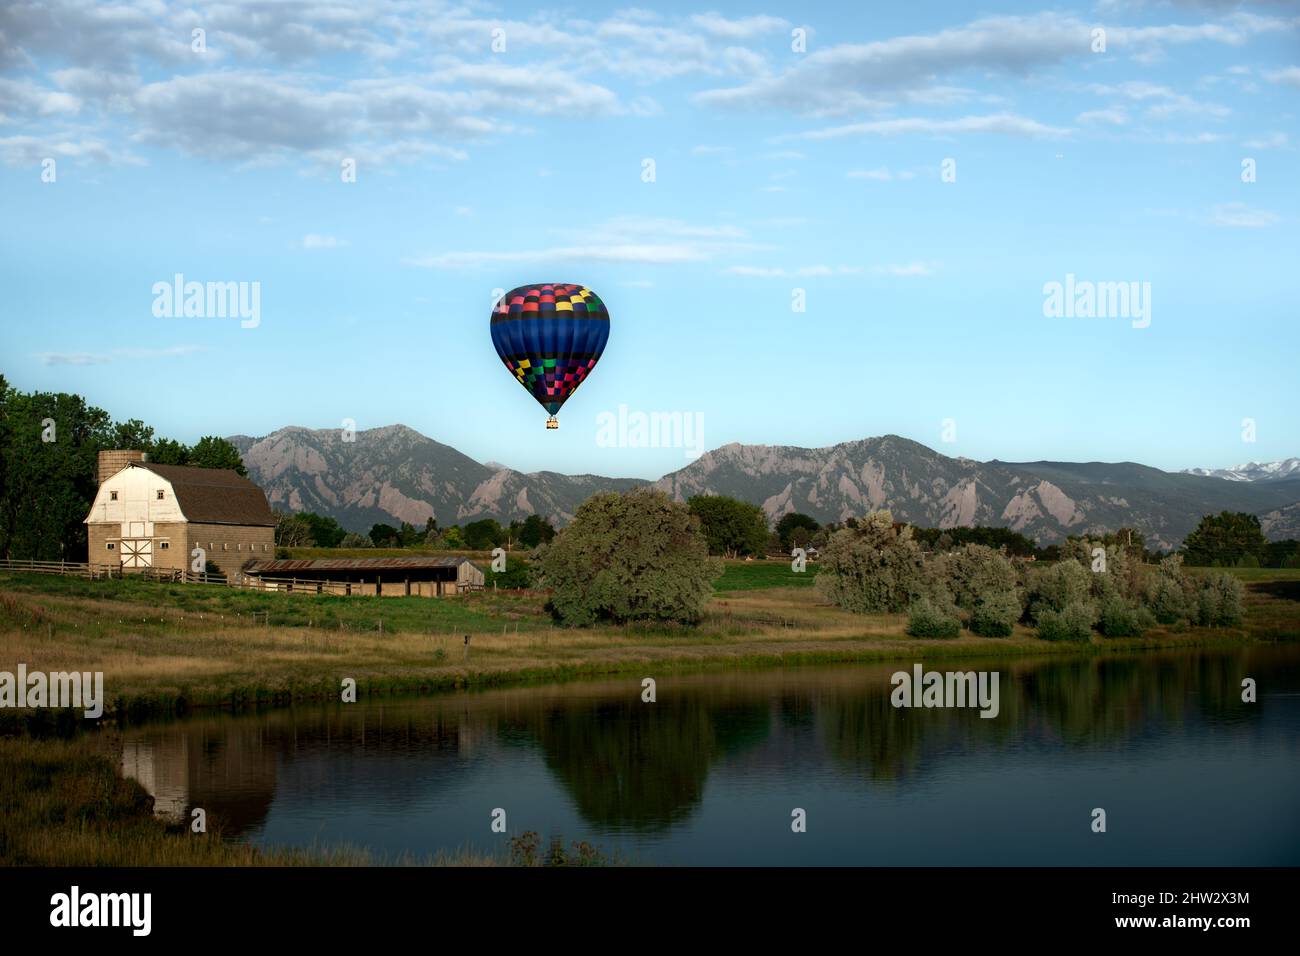 A hot air balloon rises above a barn and a lake with the mountains (the Flatirons) in the background Stock Photo